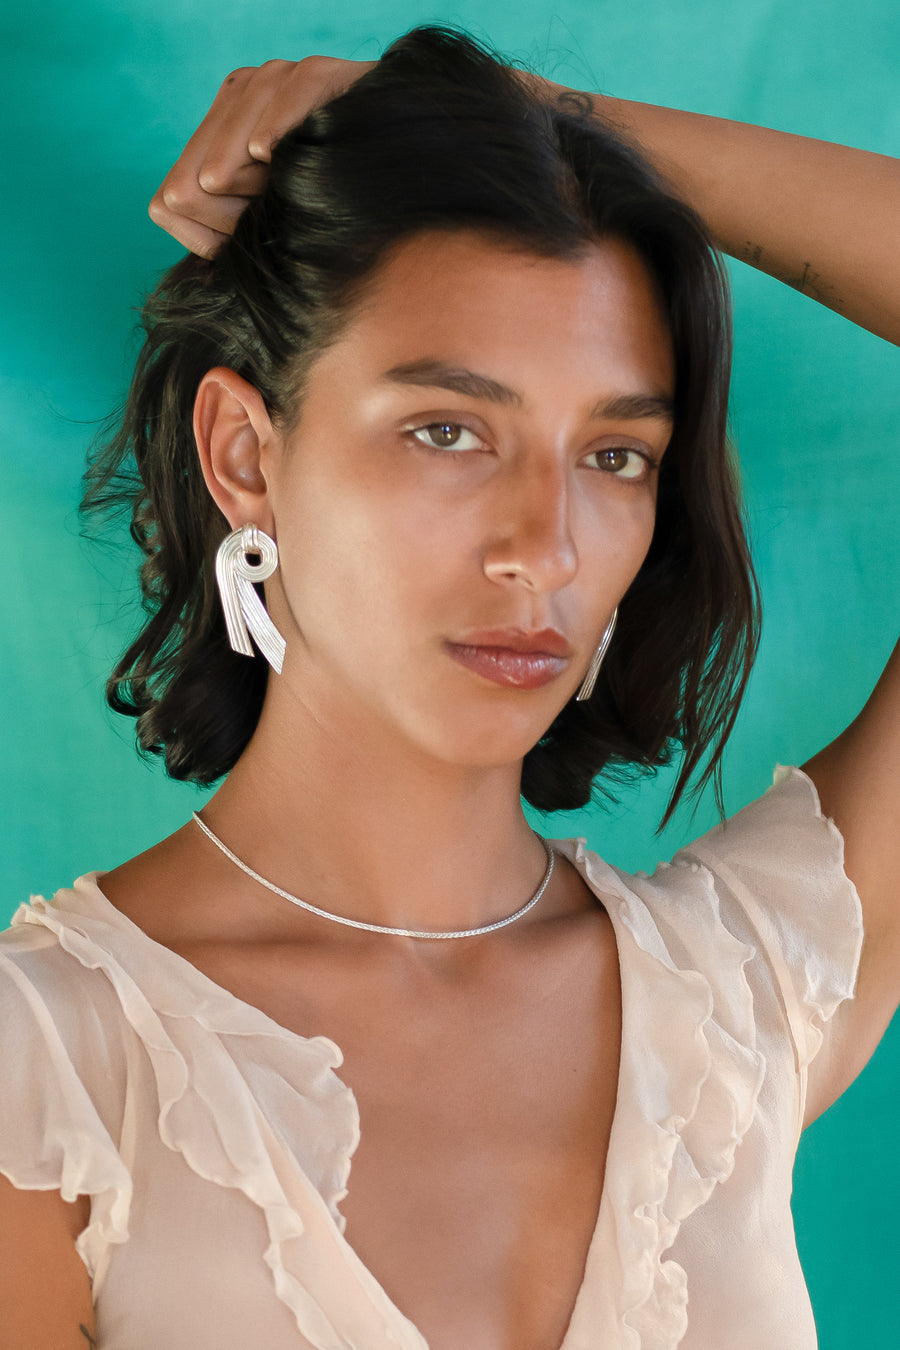 Inanna's Knot Earrings